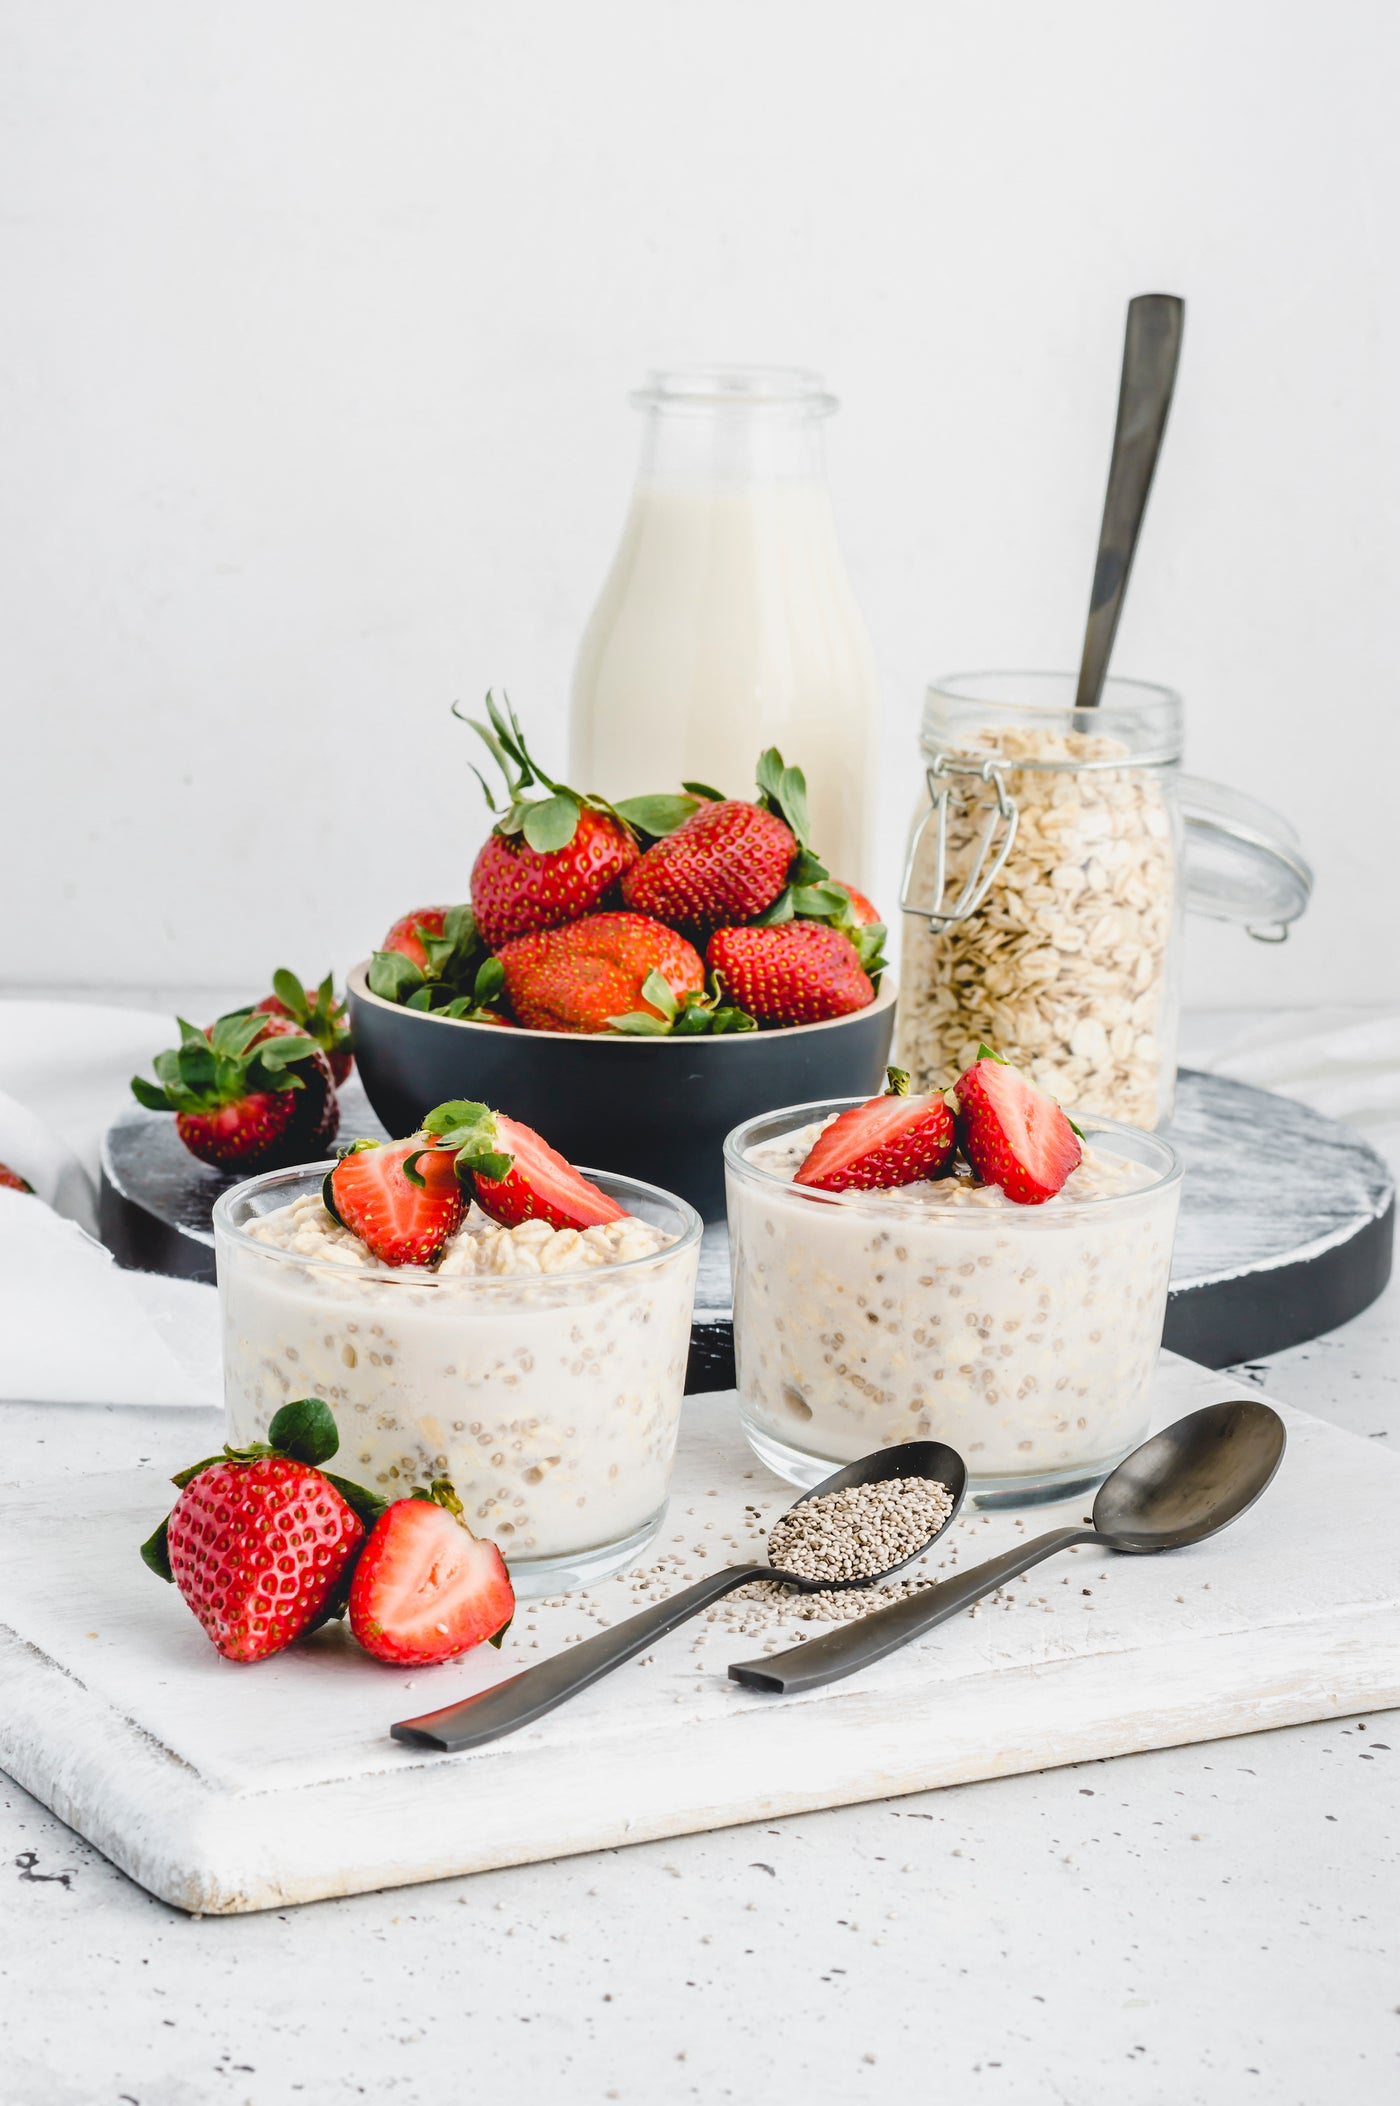 Healthy Breakfast Ideas | Our Blog | The Bod